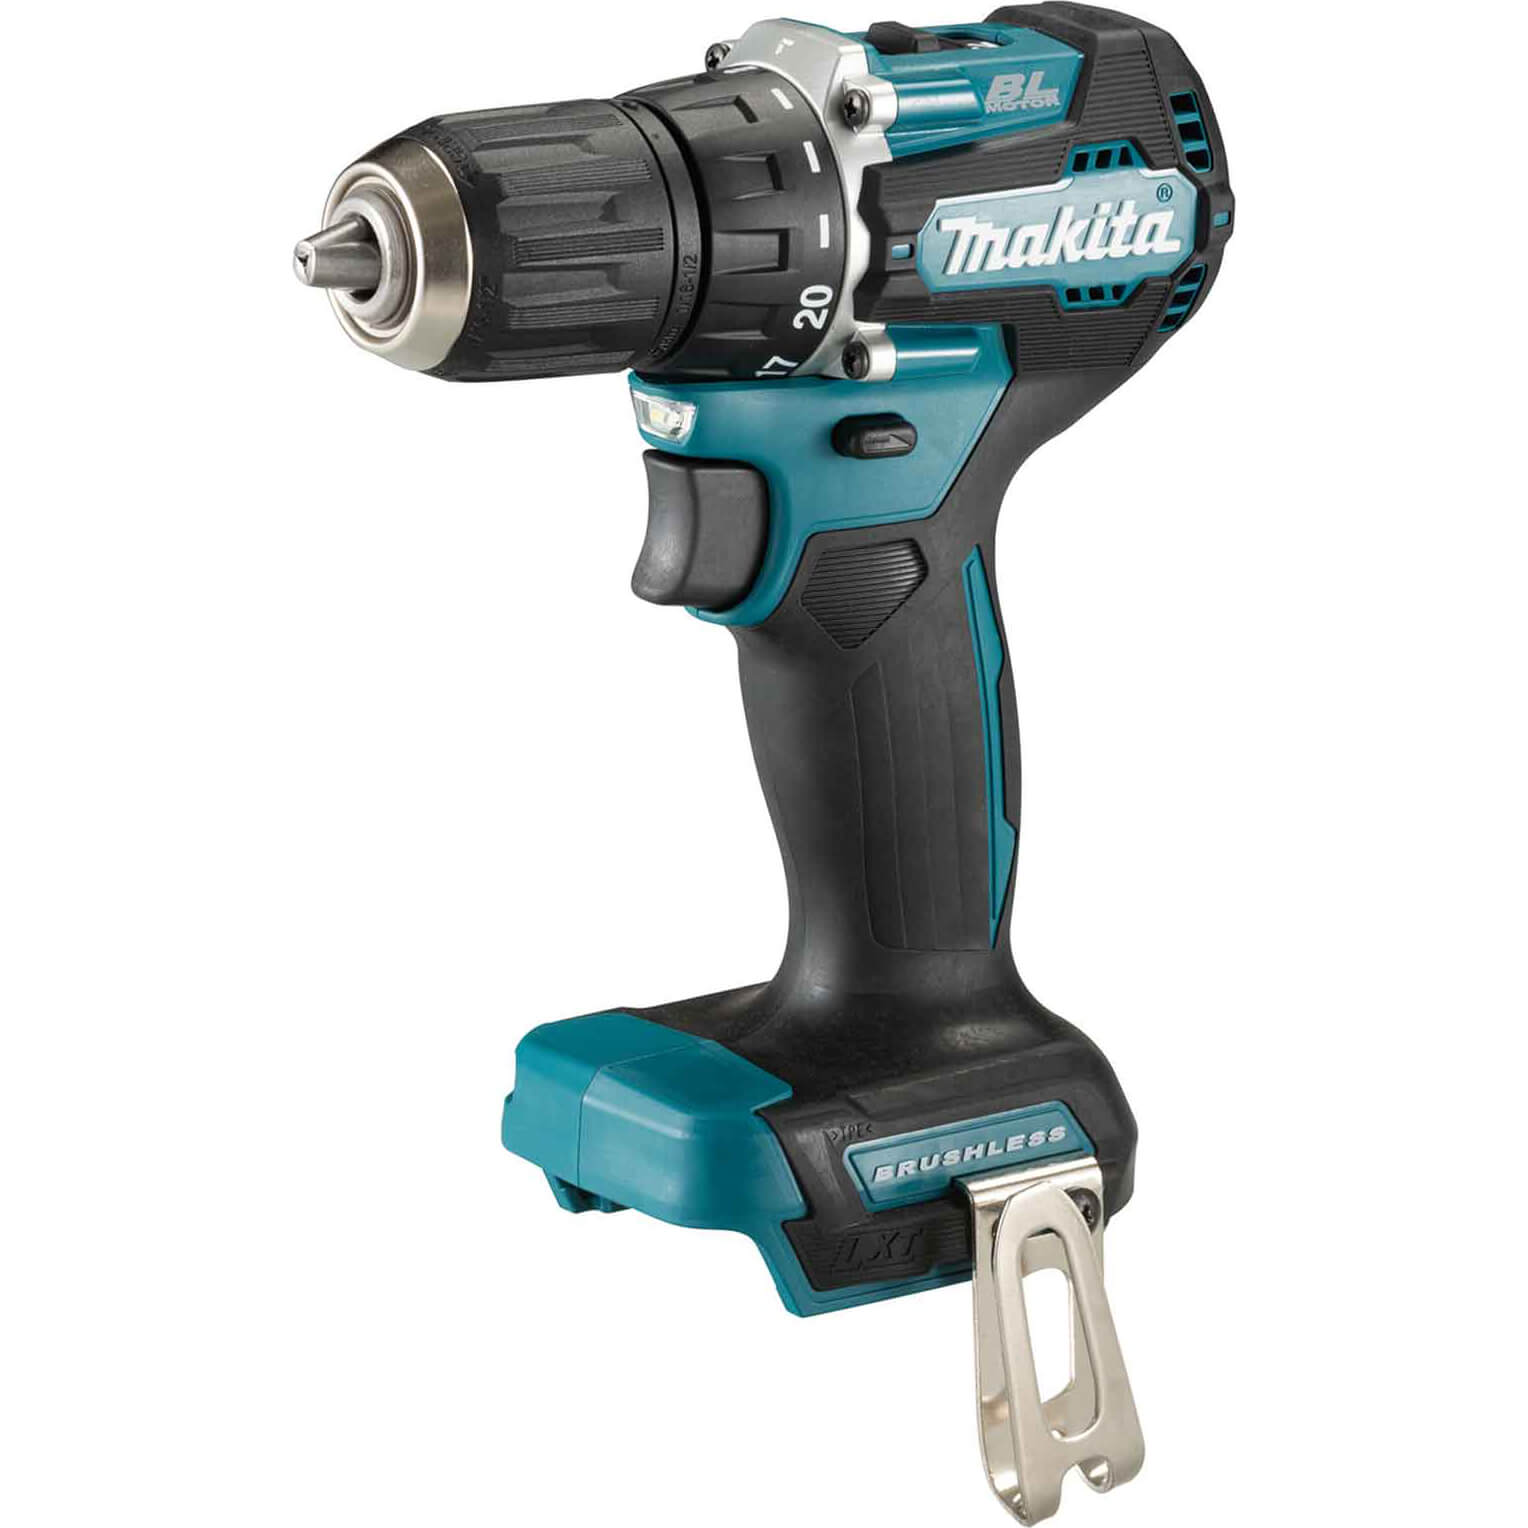 Image of Makita DDF487 18v LXT Cordless Brushless Drill Driver No Batteries No Charger No Case